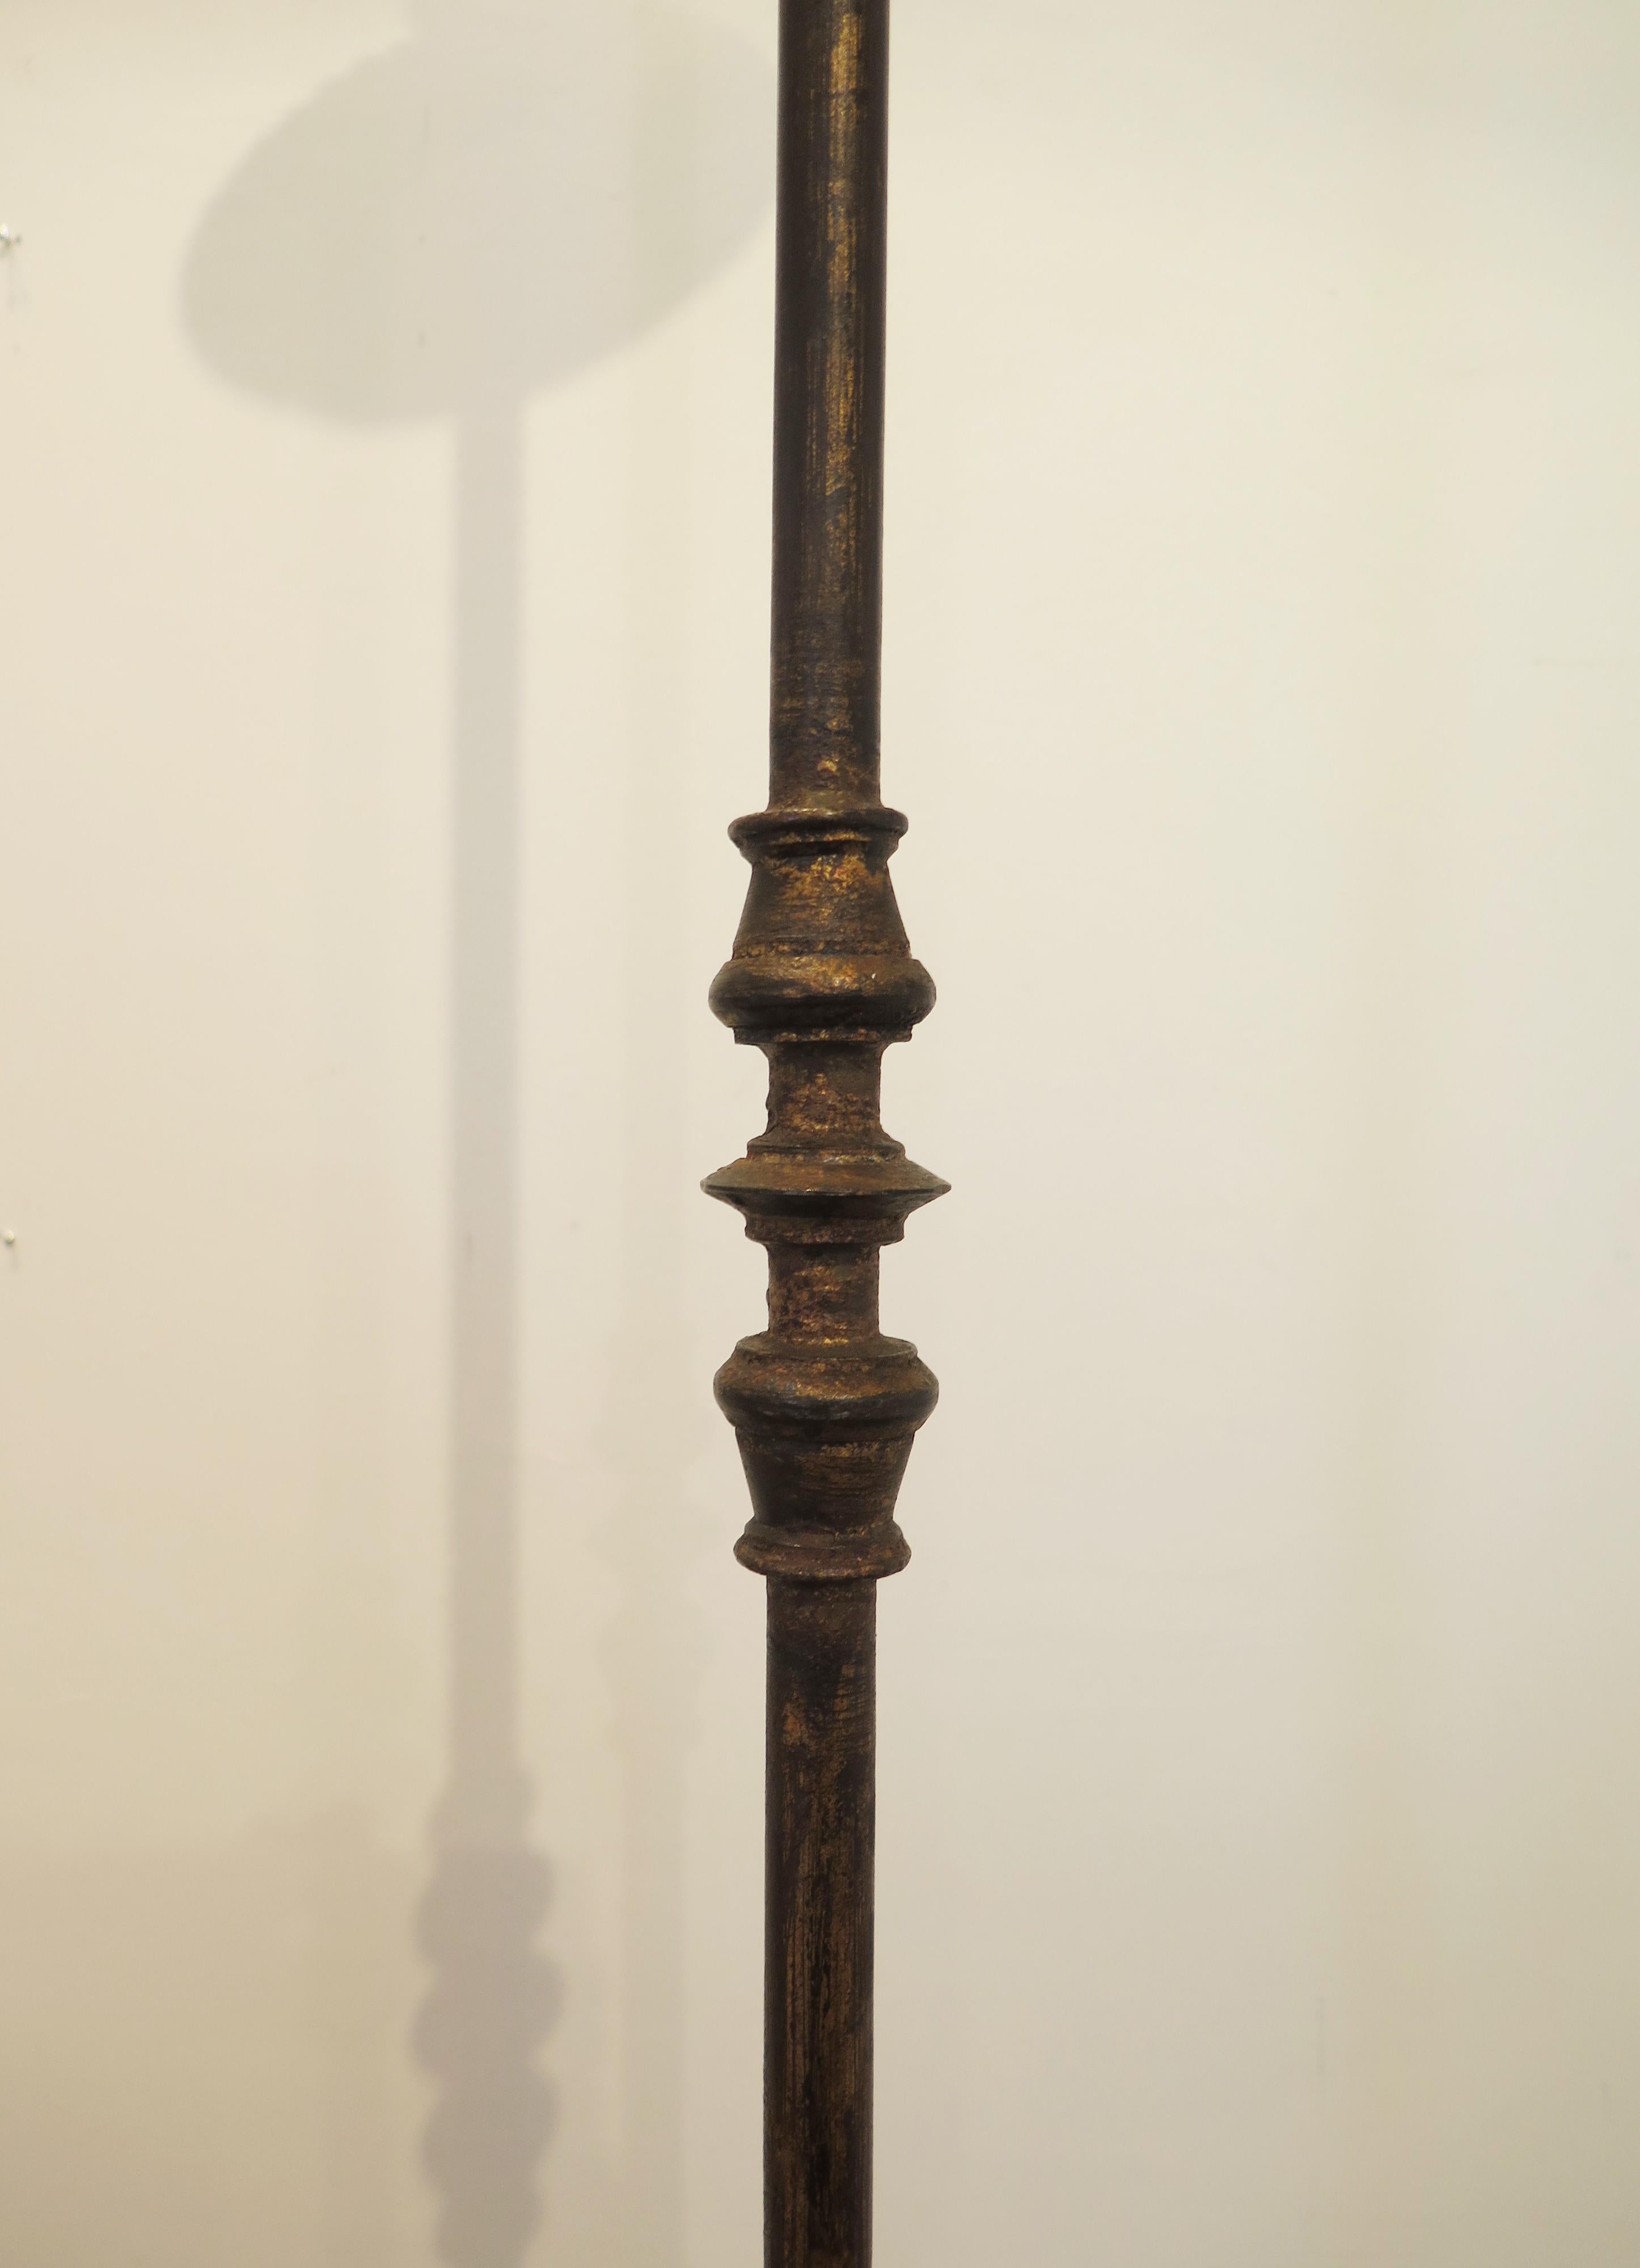 Antique baroque iron torchère already wired and ready for use. Floor lamp measures 59